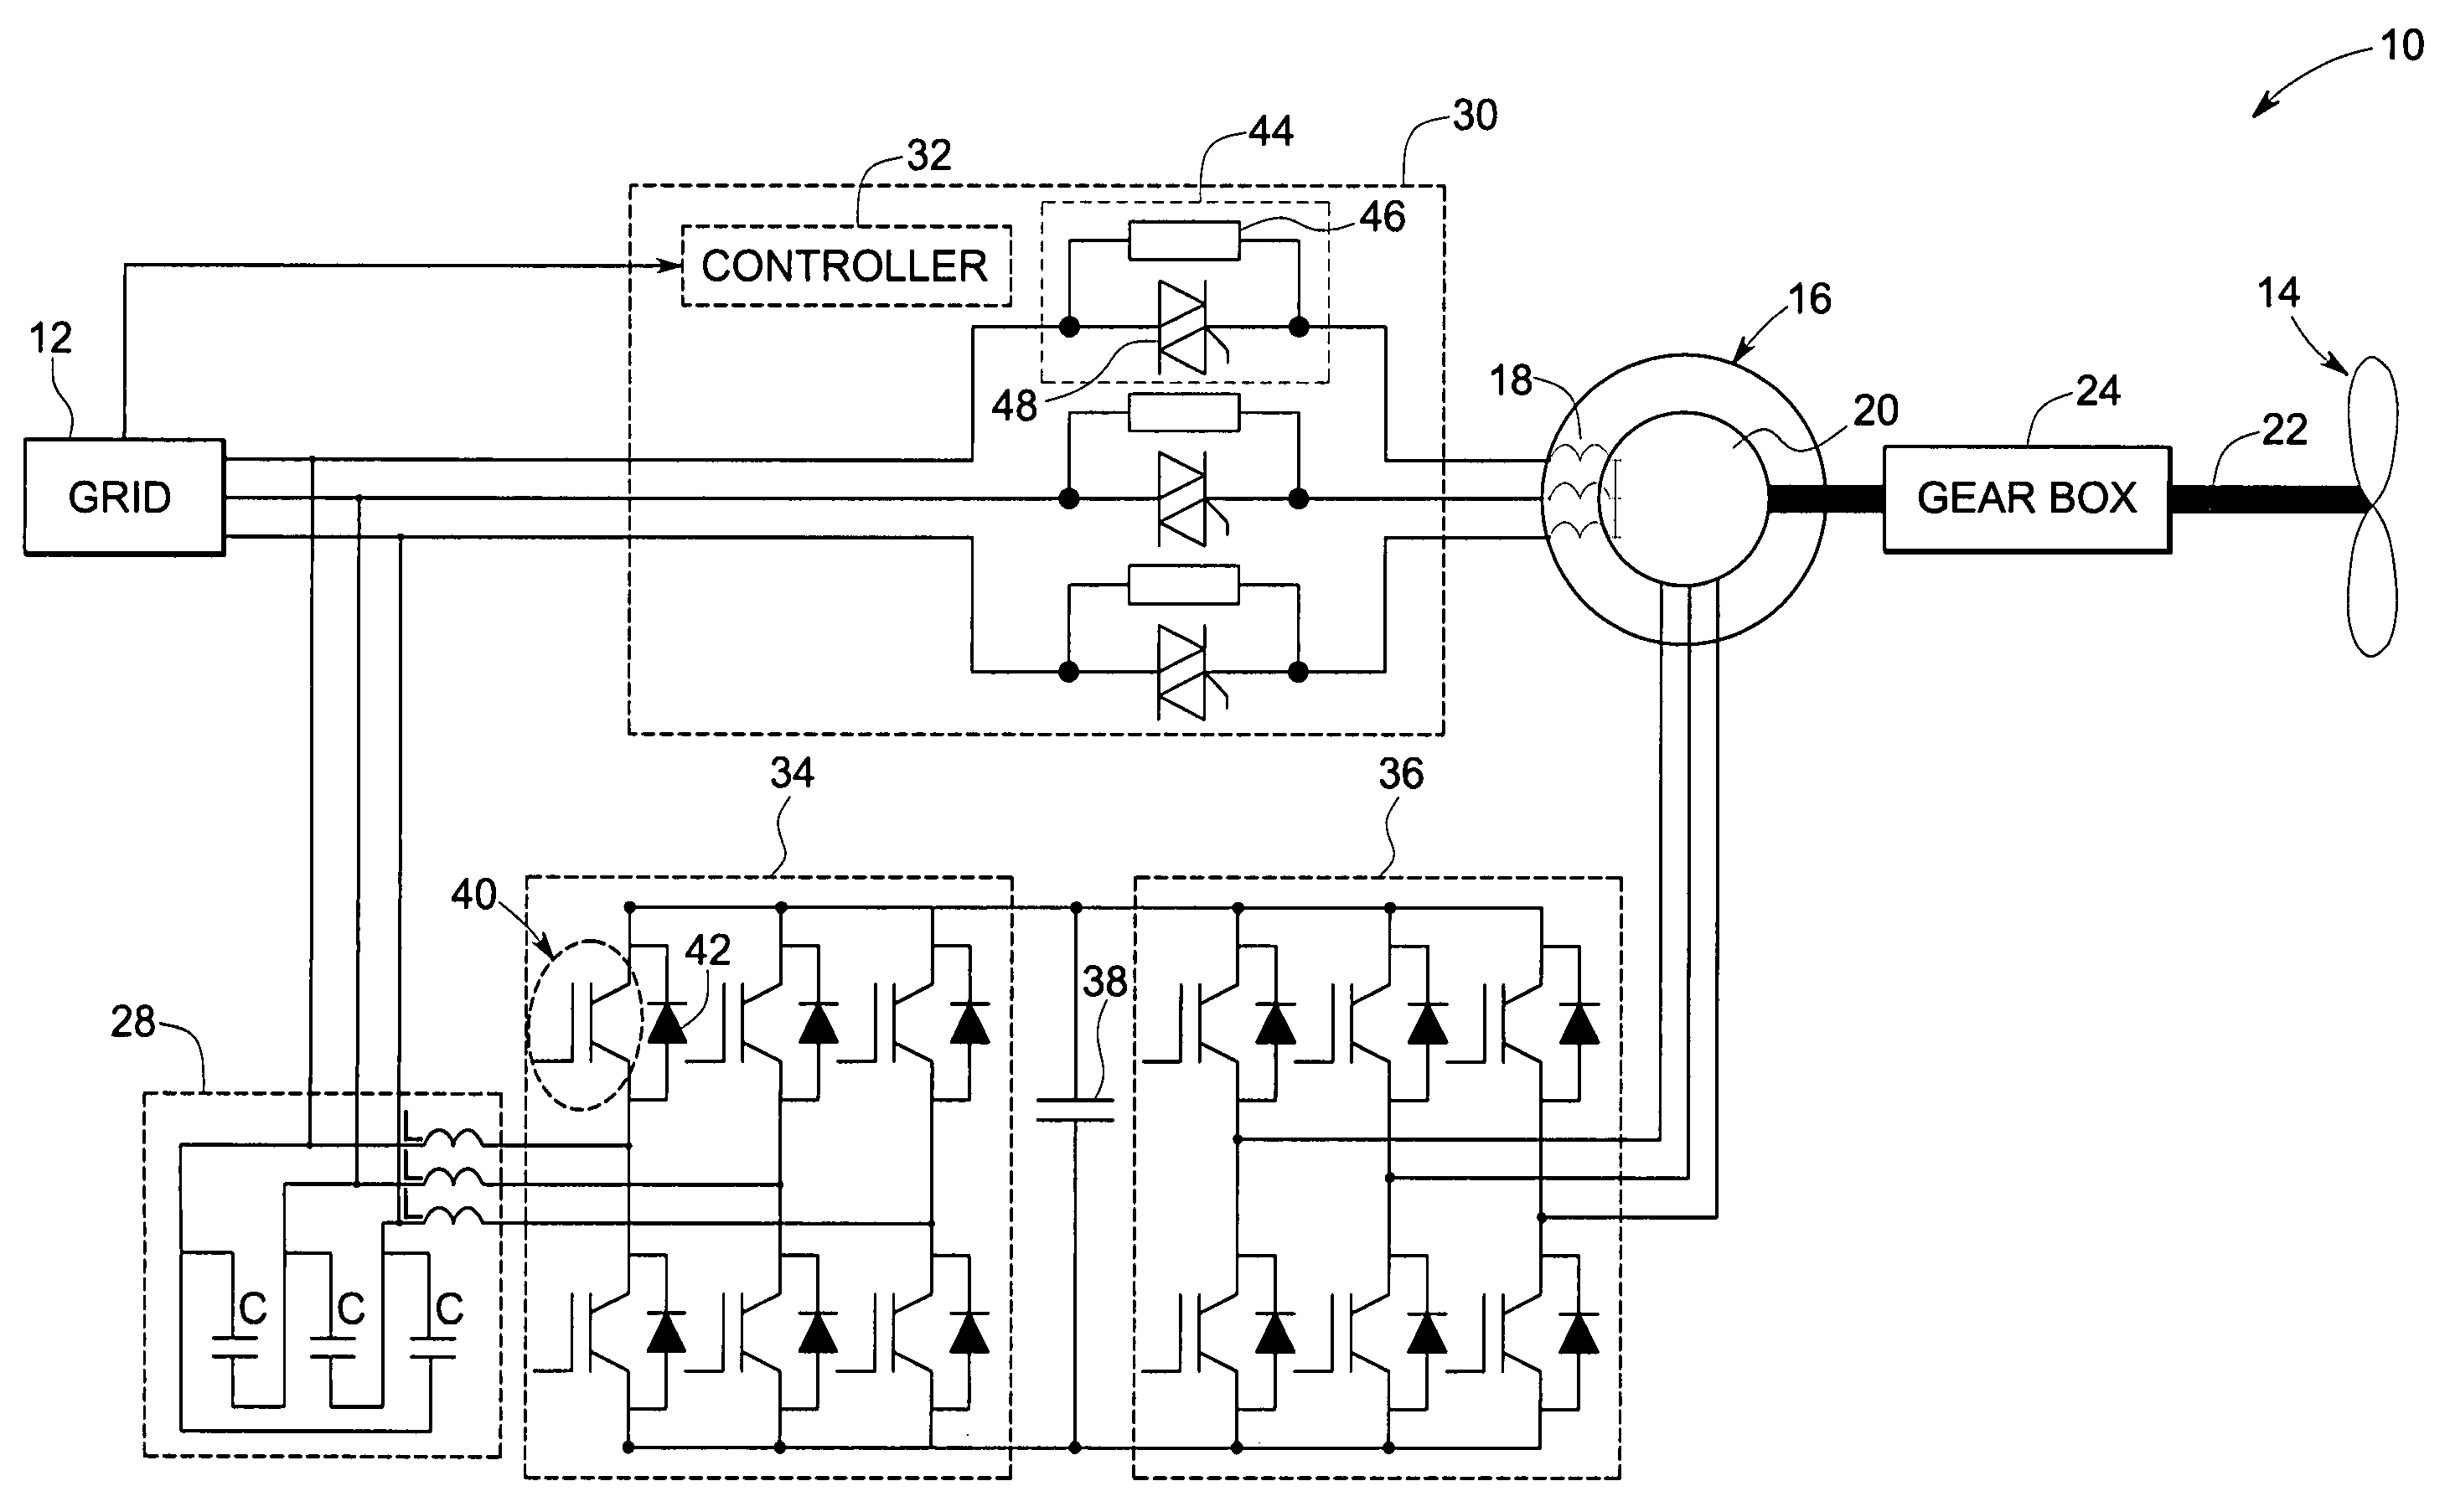 System and method of operating double fed induction generators